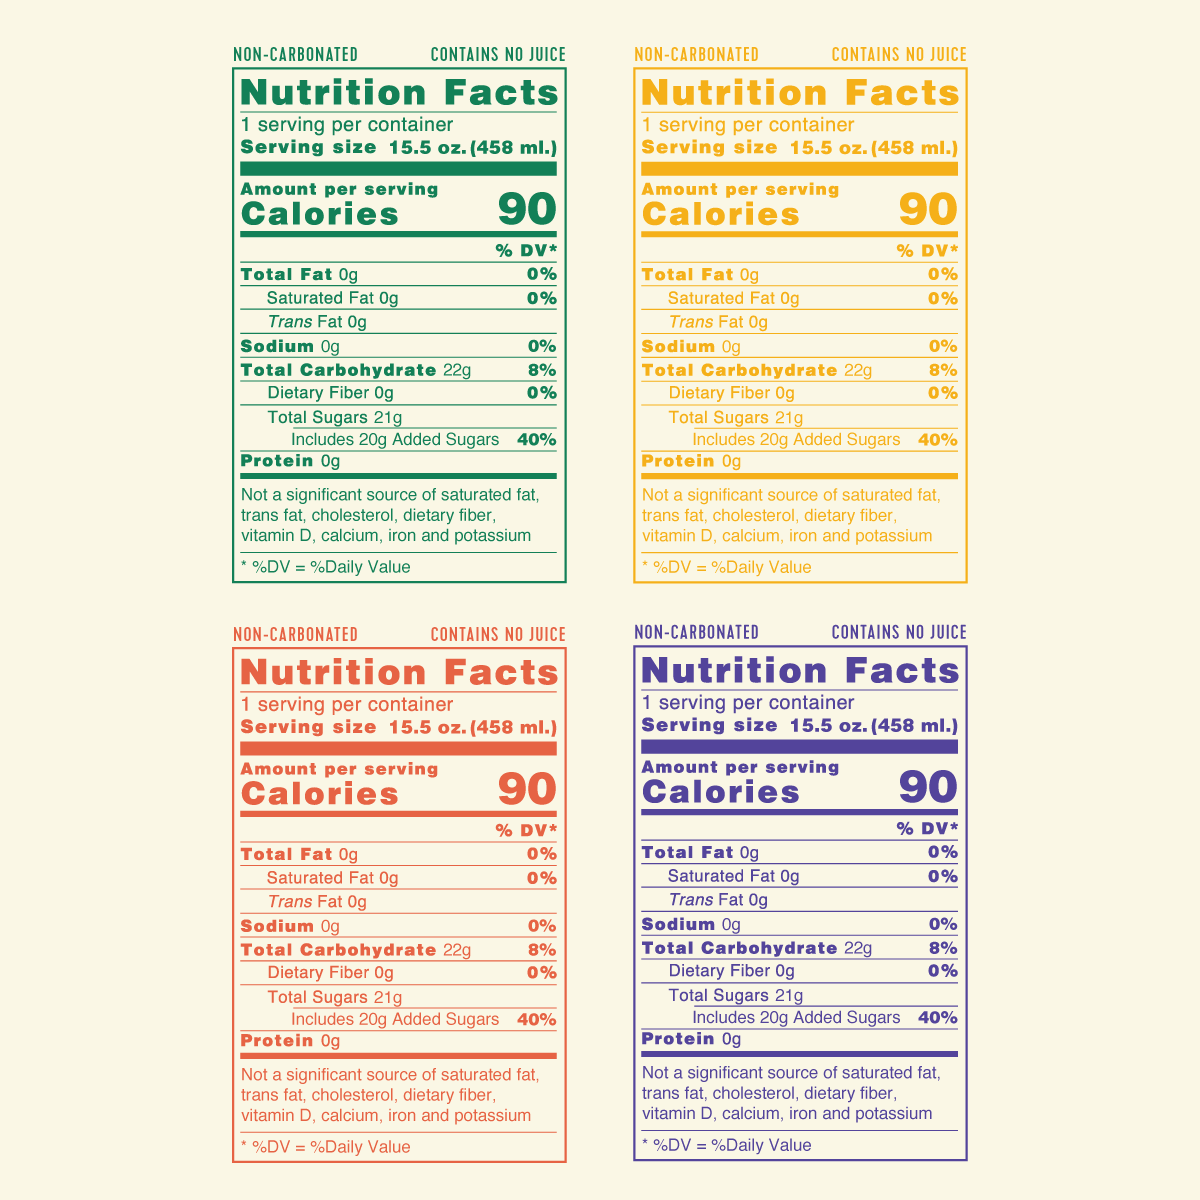 Non-carbonated nutritional info